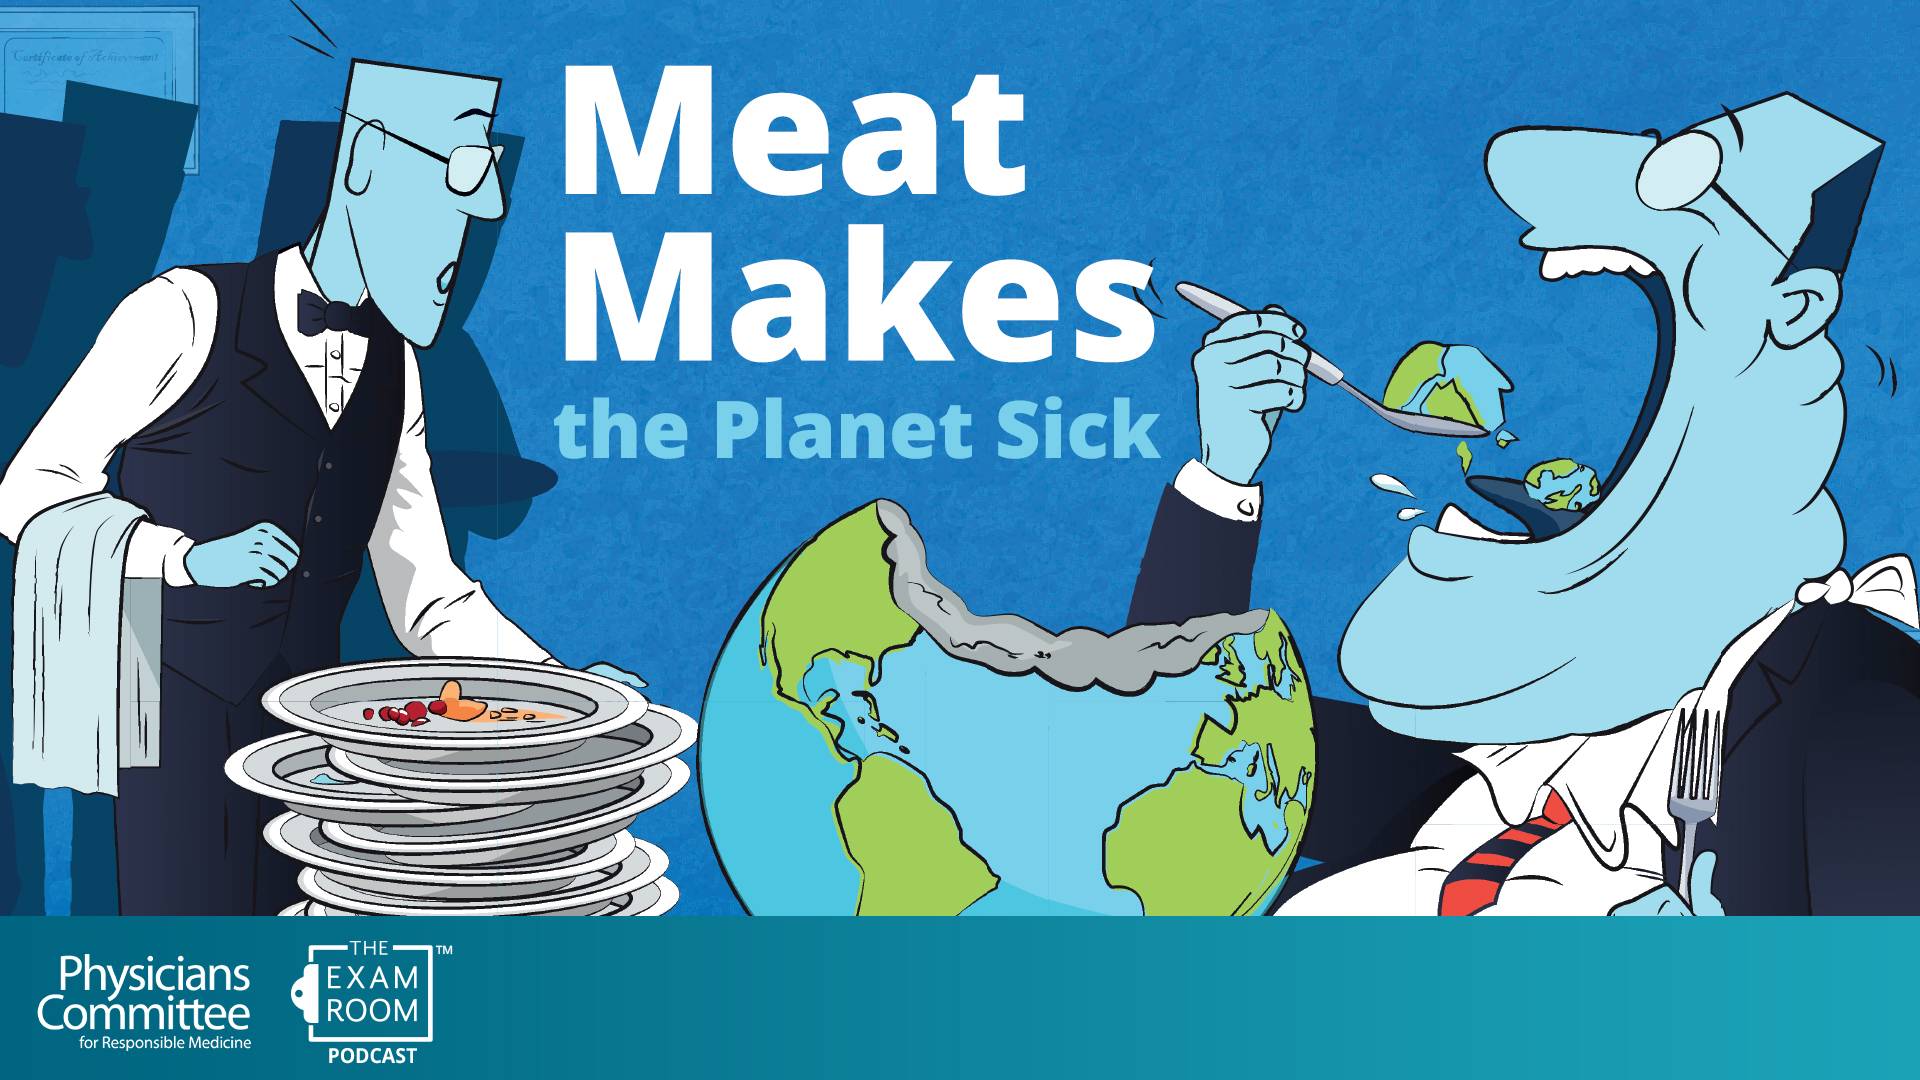 Eating for 8 Billion: Your Dinner Impacts the Entire World